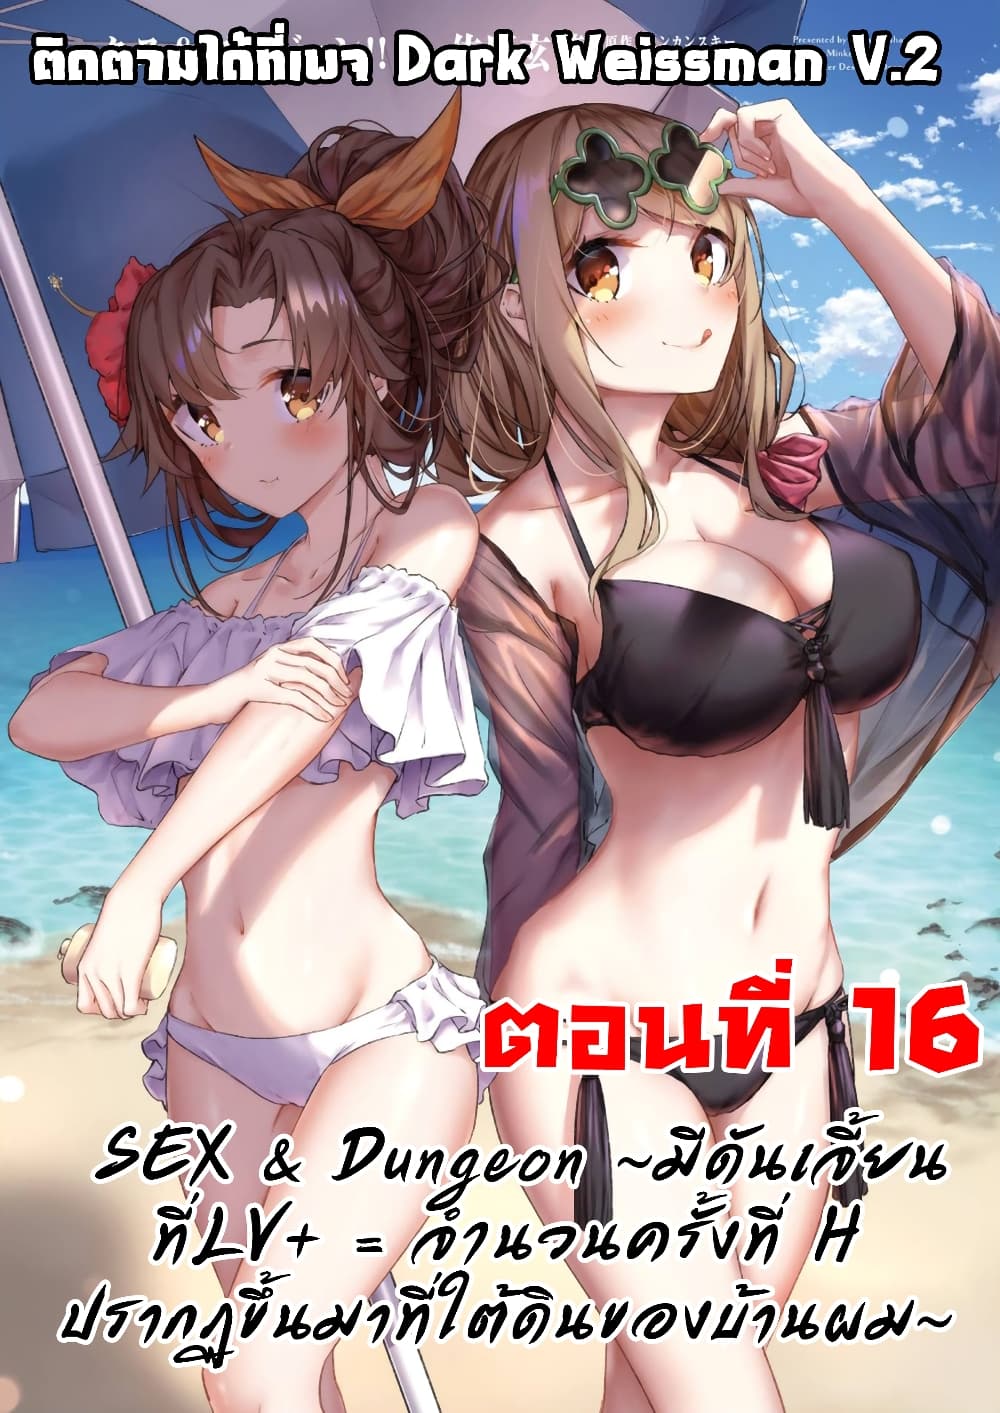 SEX AND DUNGEON 16 (1)